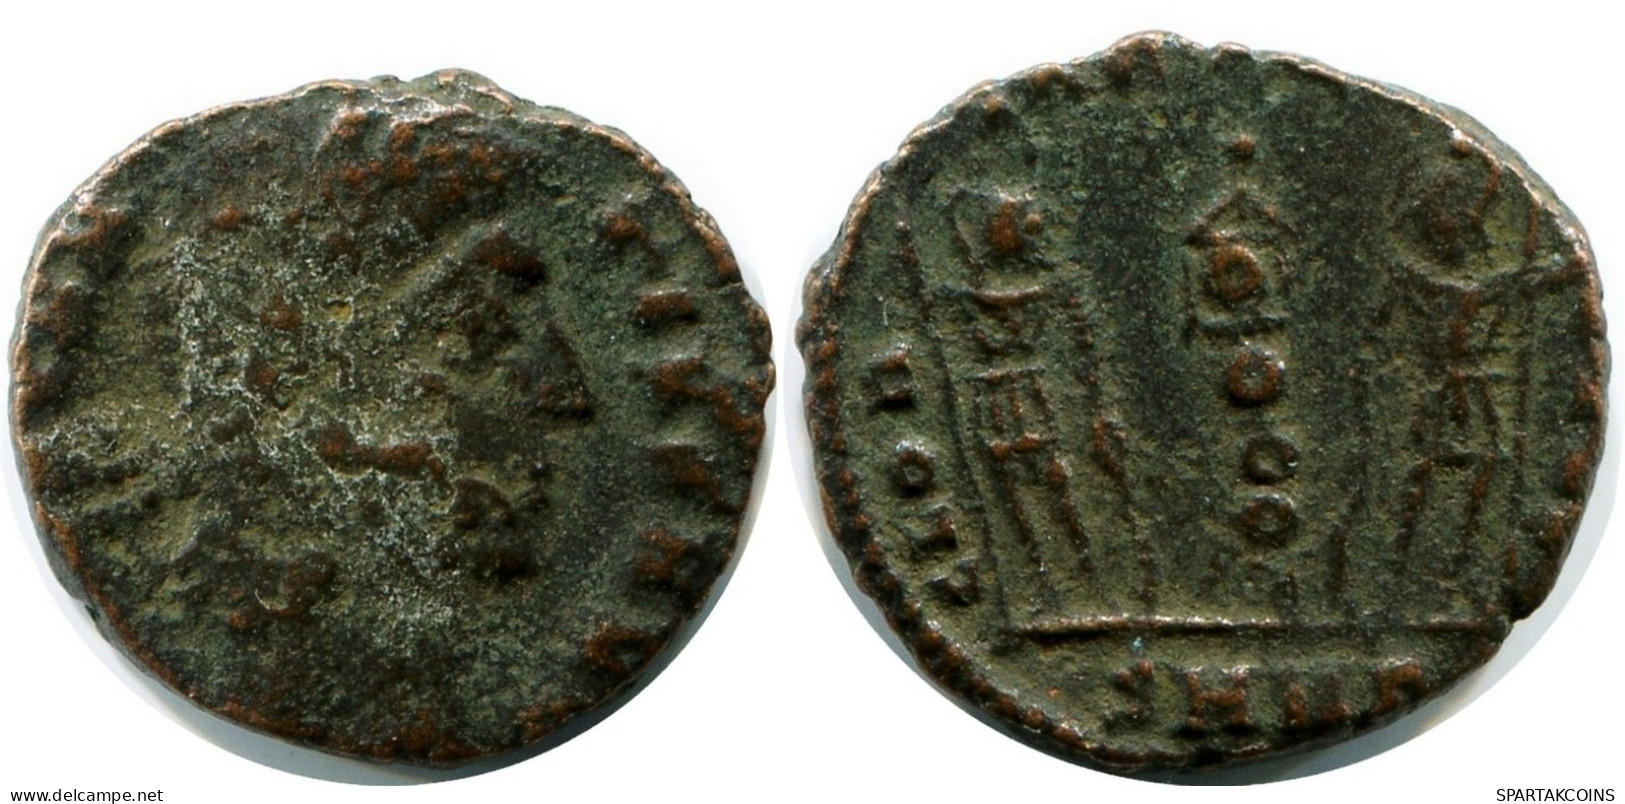 CONSTANS MINTED IN CYZICUS FROM THE ROYAL ONTARIO MUSEUM #ANC11680.14.F.A - The Christian Empire (307 AD To 363 AD)